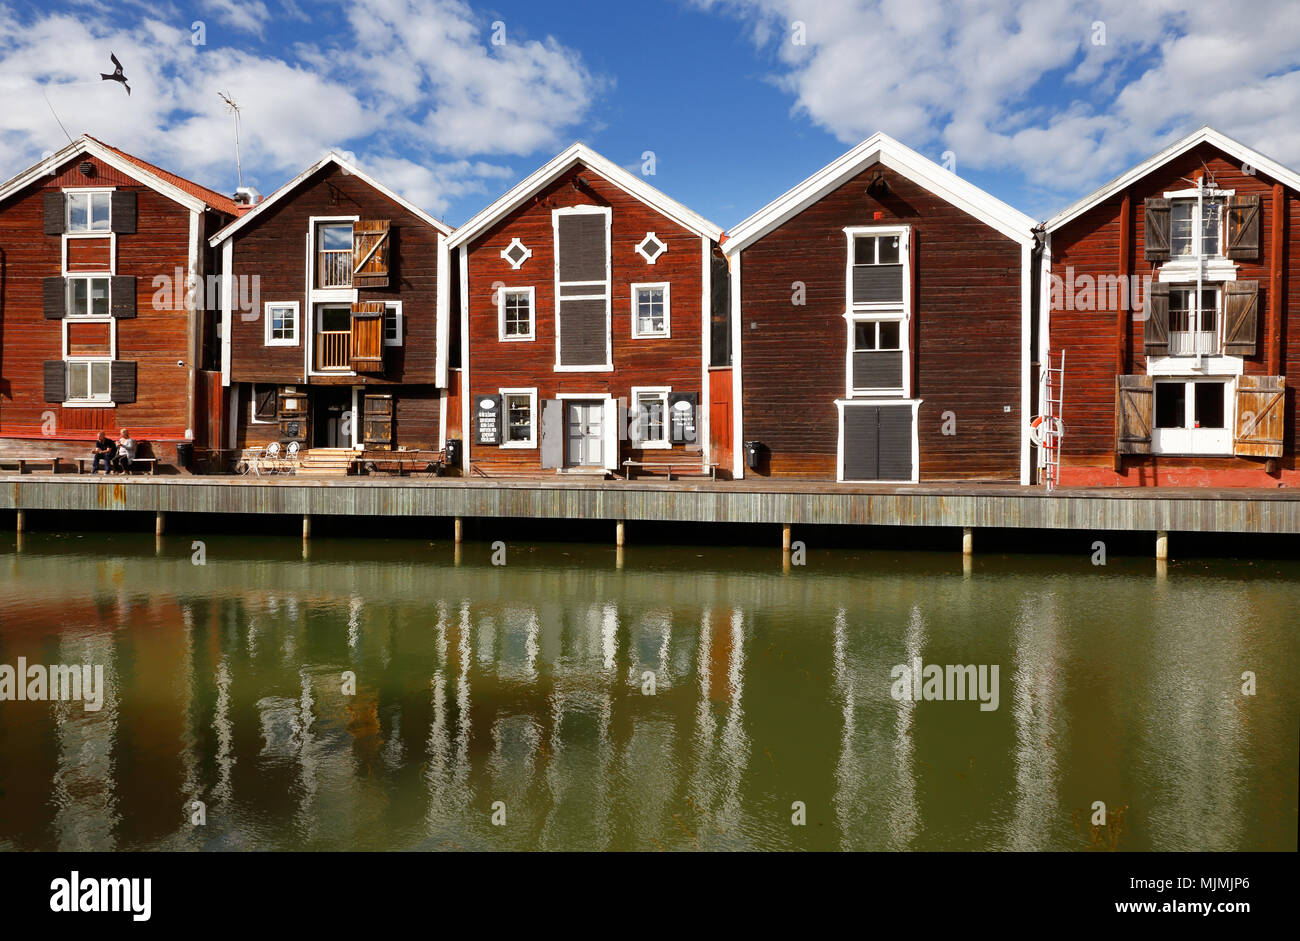 Hudiksvall, Sweden - July 5, 2017: Old red warehouses built of wood next to the water. Stock Photo